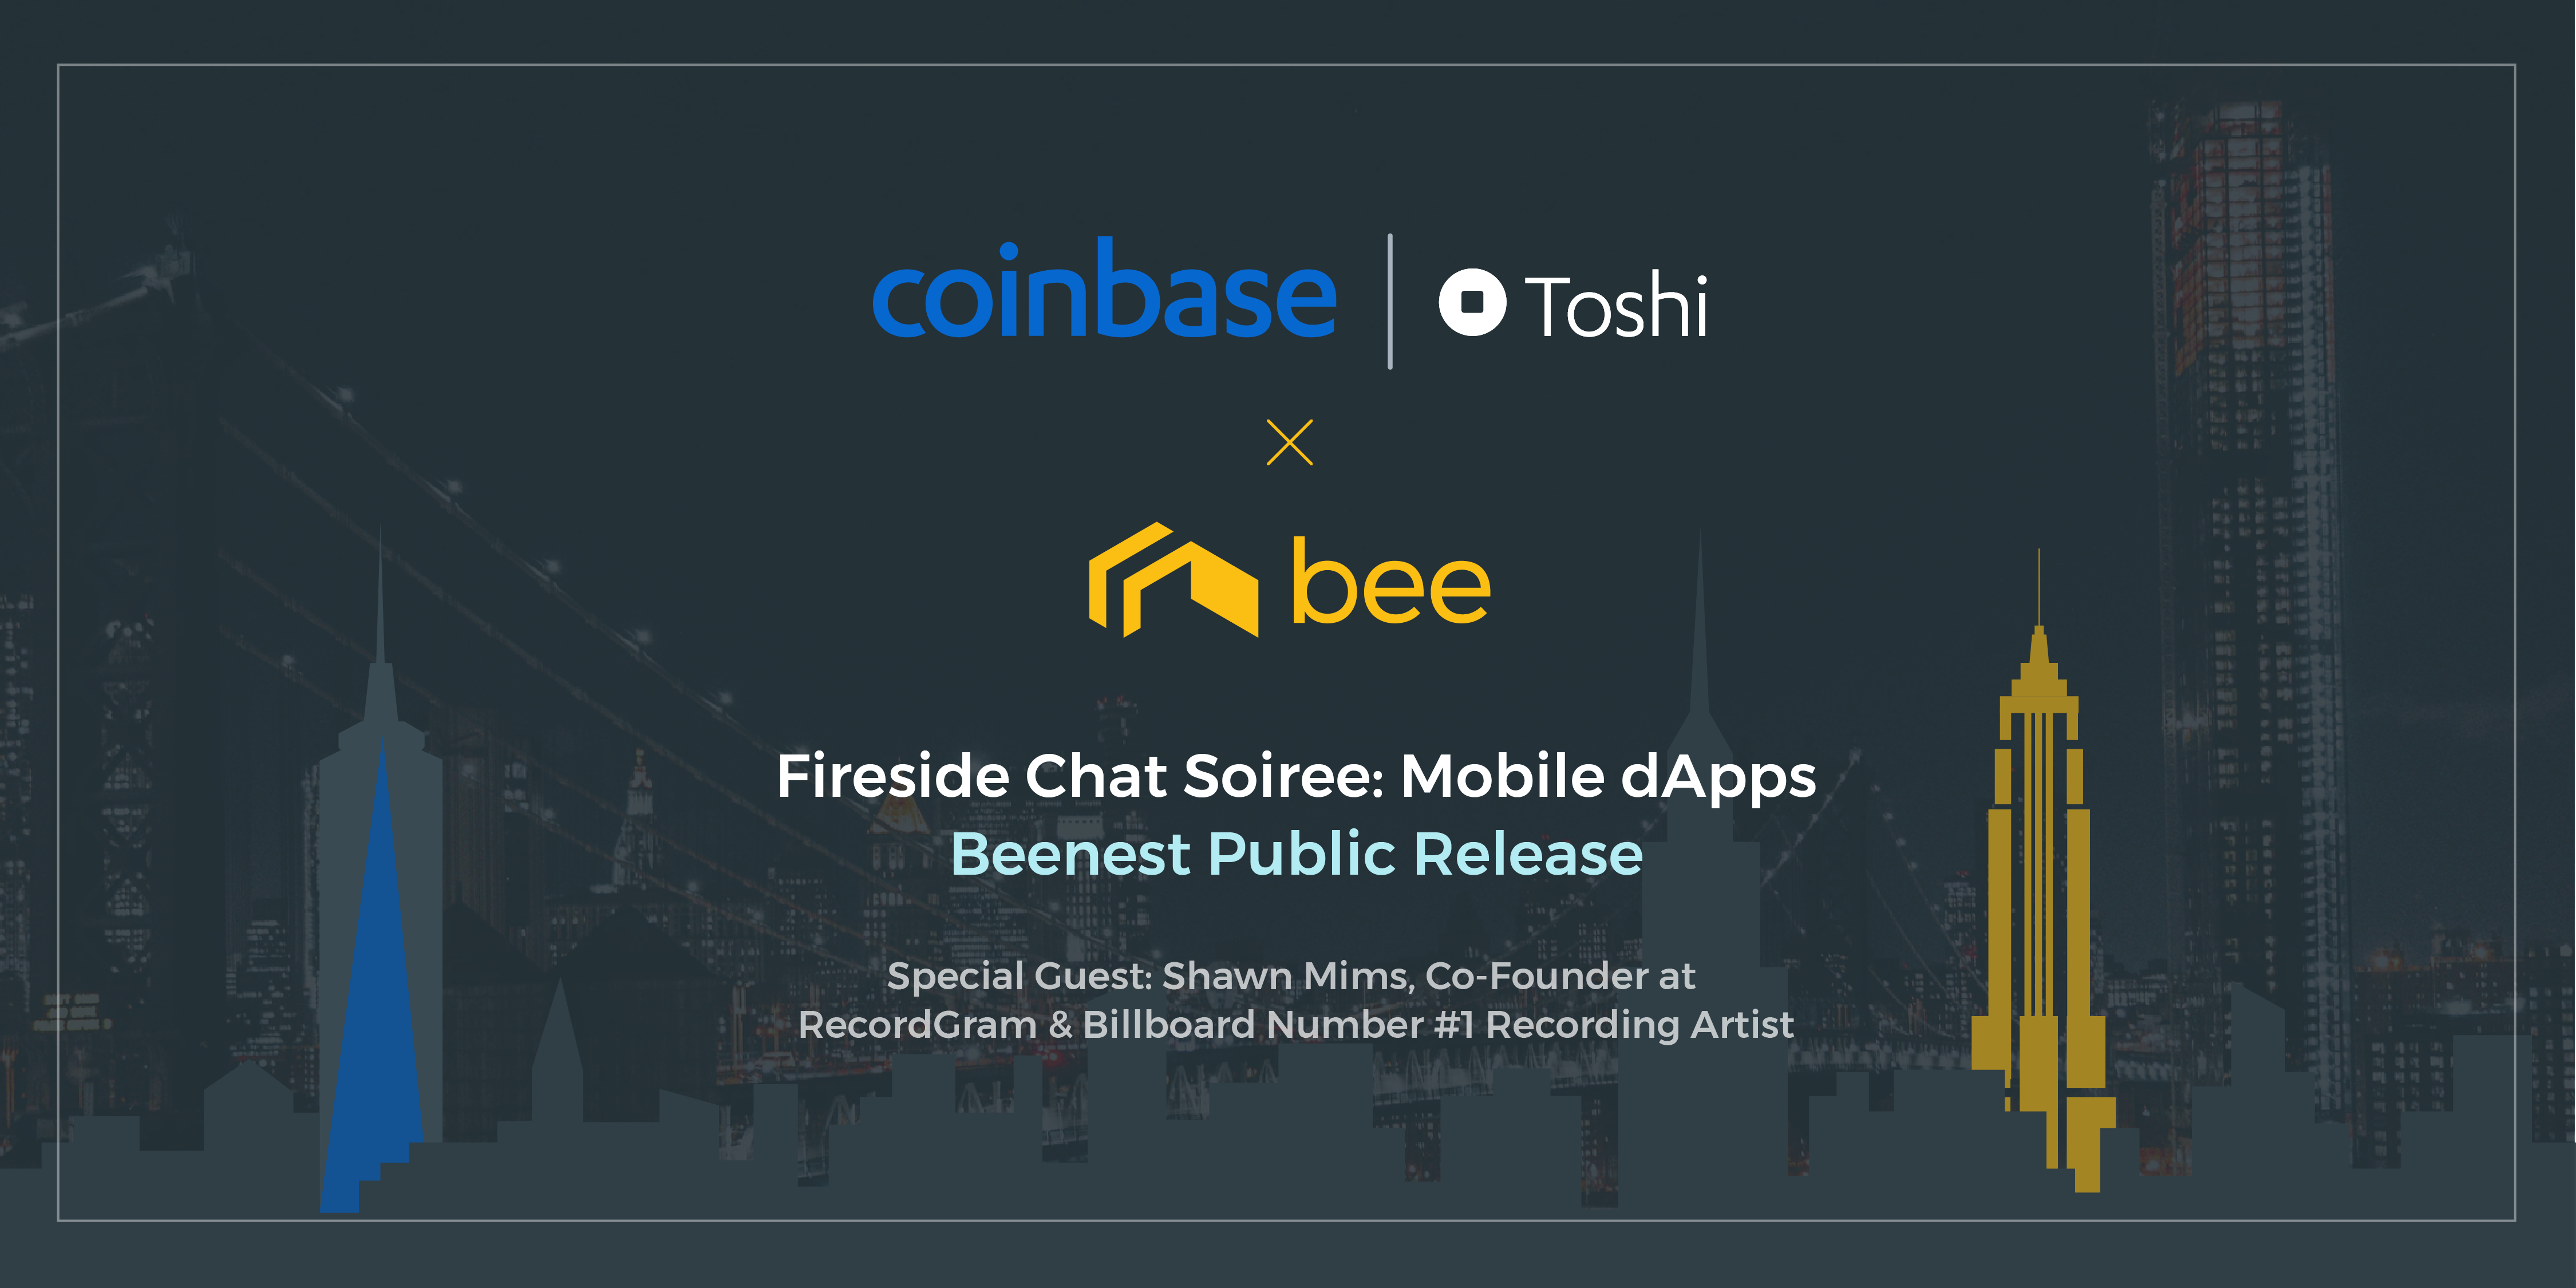 Bee Token & Toshi (Coinbase) Host Fireside Chat on Mobile ...